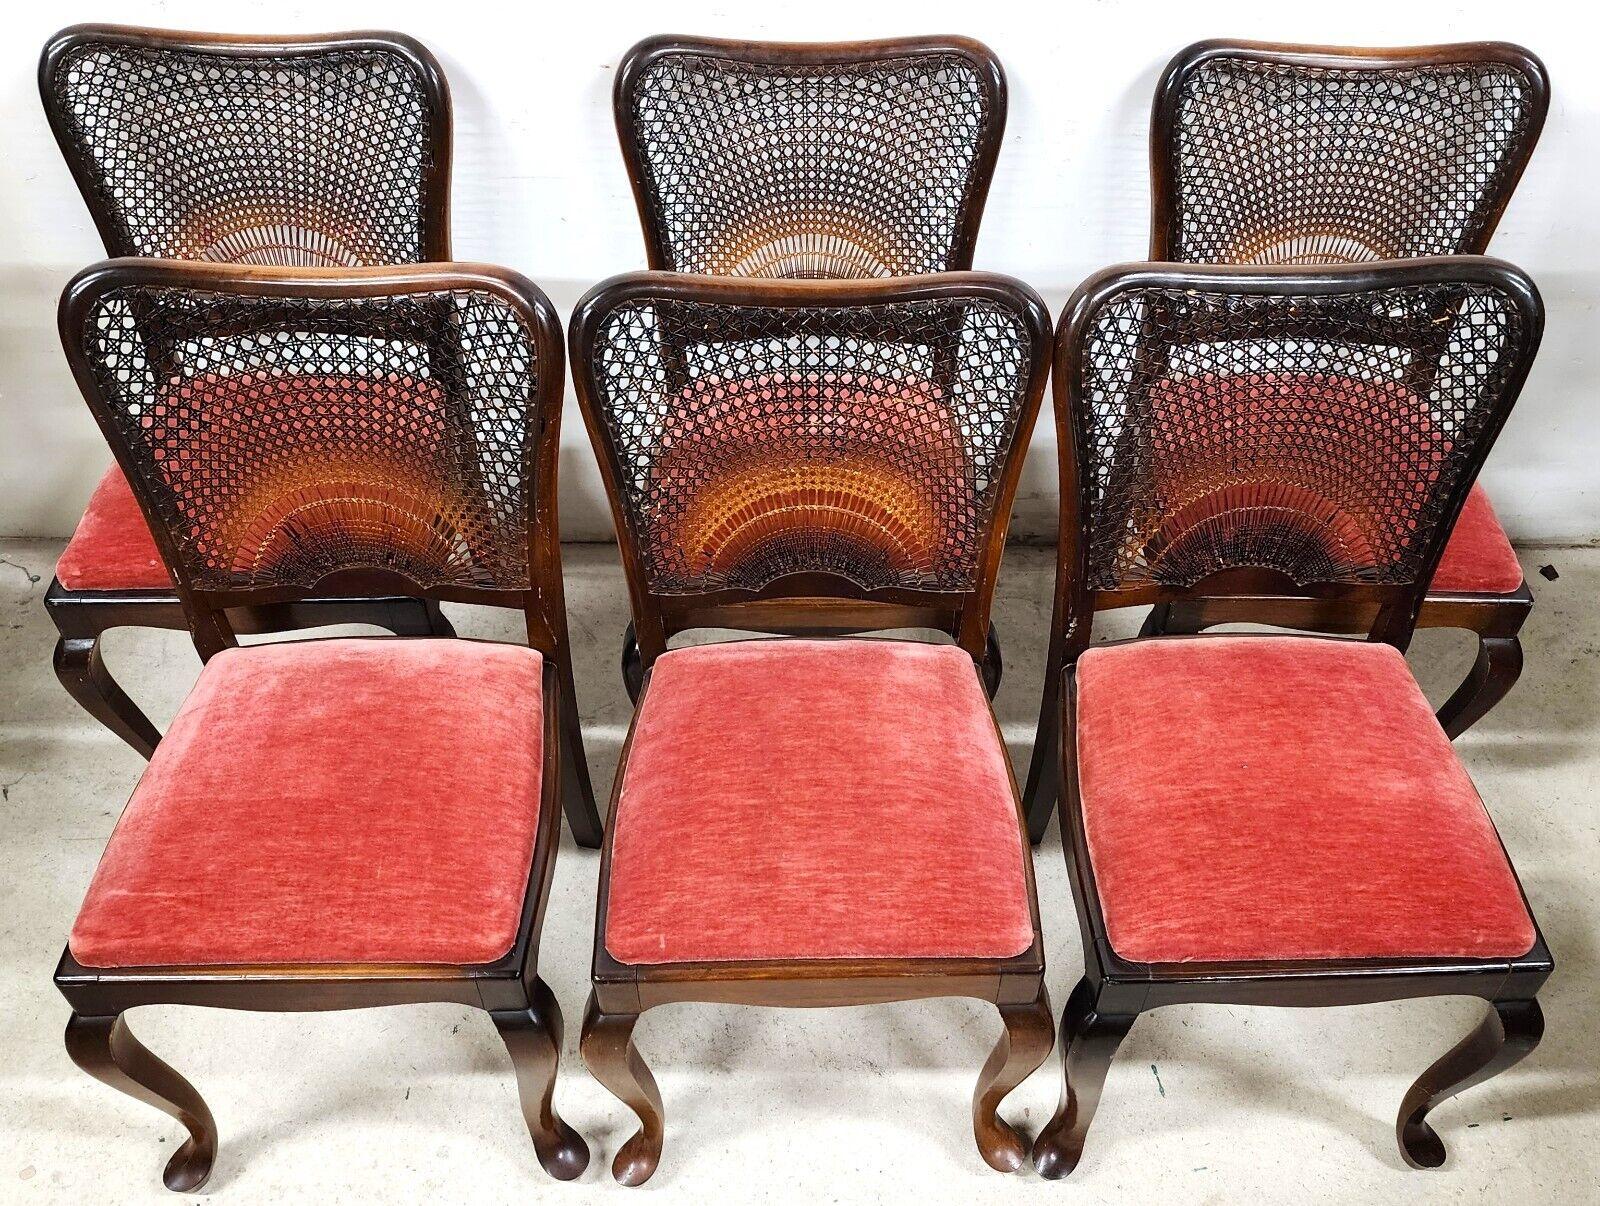 Offering One of our recent Palm Beach estate fine furniture acquisitions of a
Set of 6 vintage William & Mary queen Anne style dining chairs with cane back 

Approximate Measurements in Inches
34